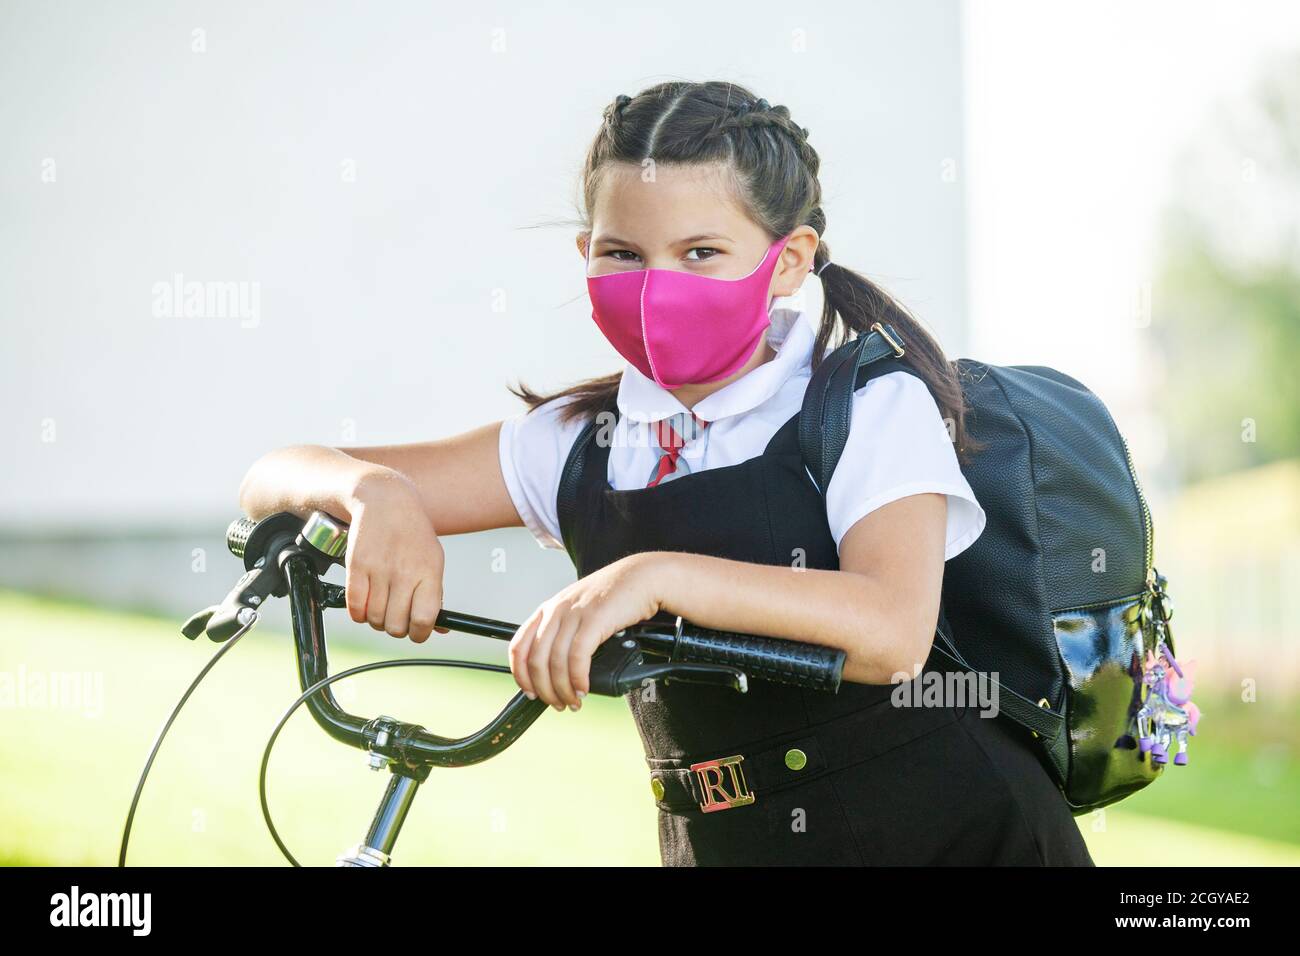 A ten year old schoolgirl standing with her hands on her bike wearing a face mask. Stock Photo